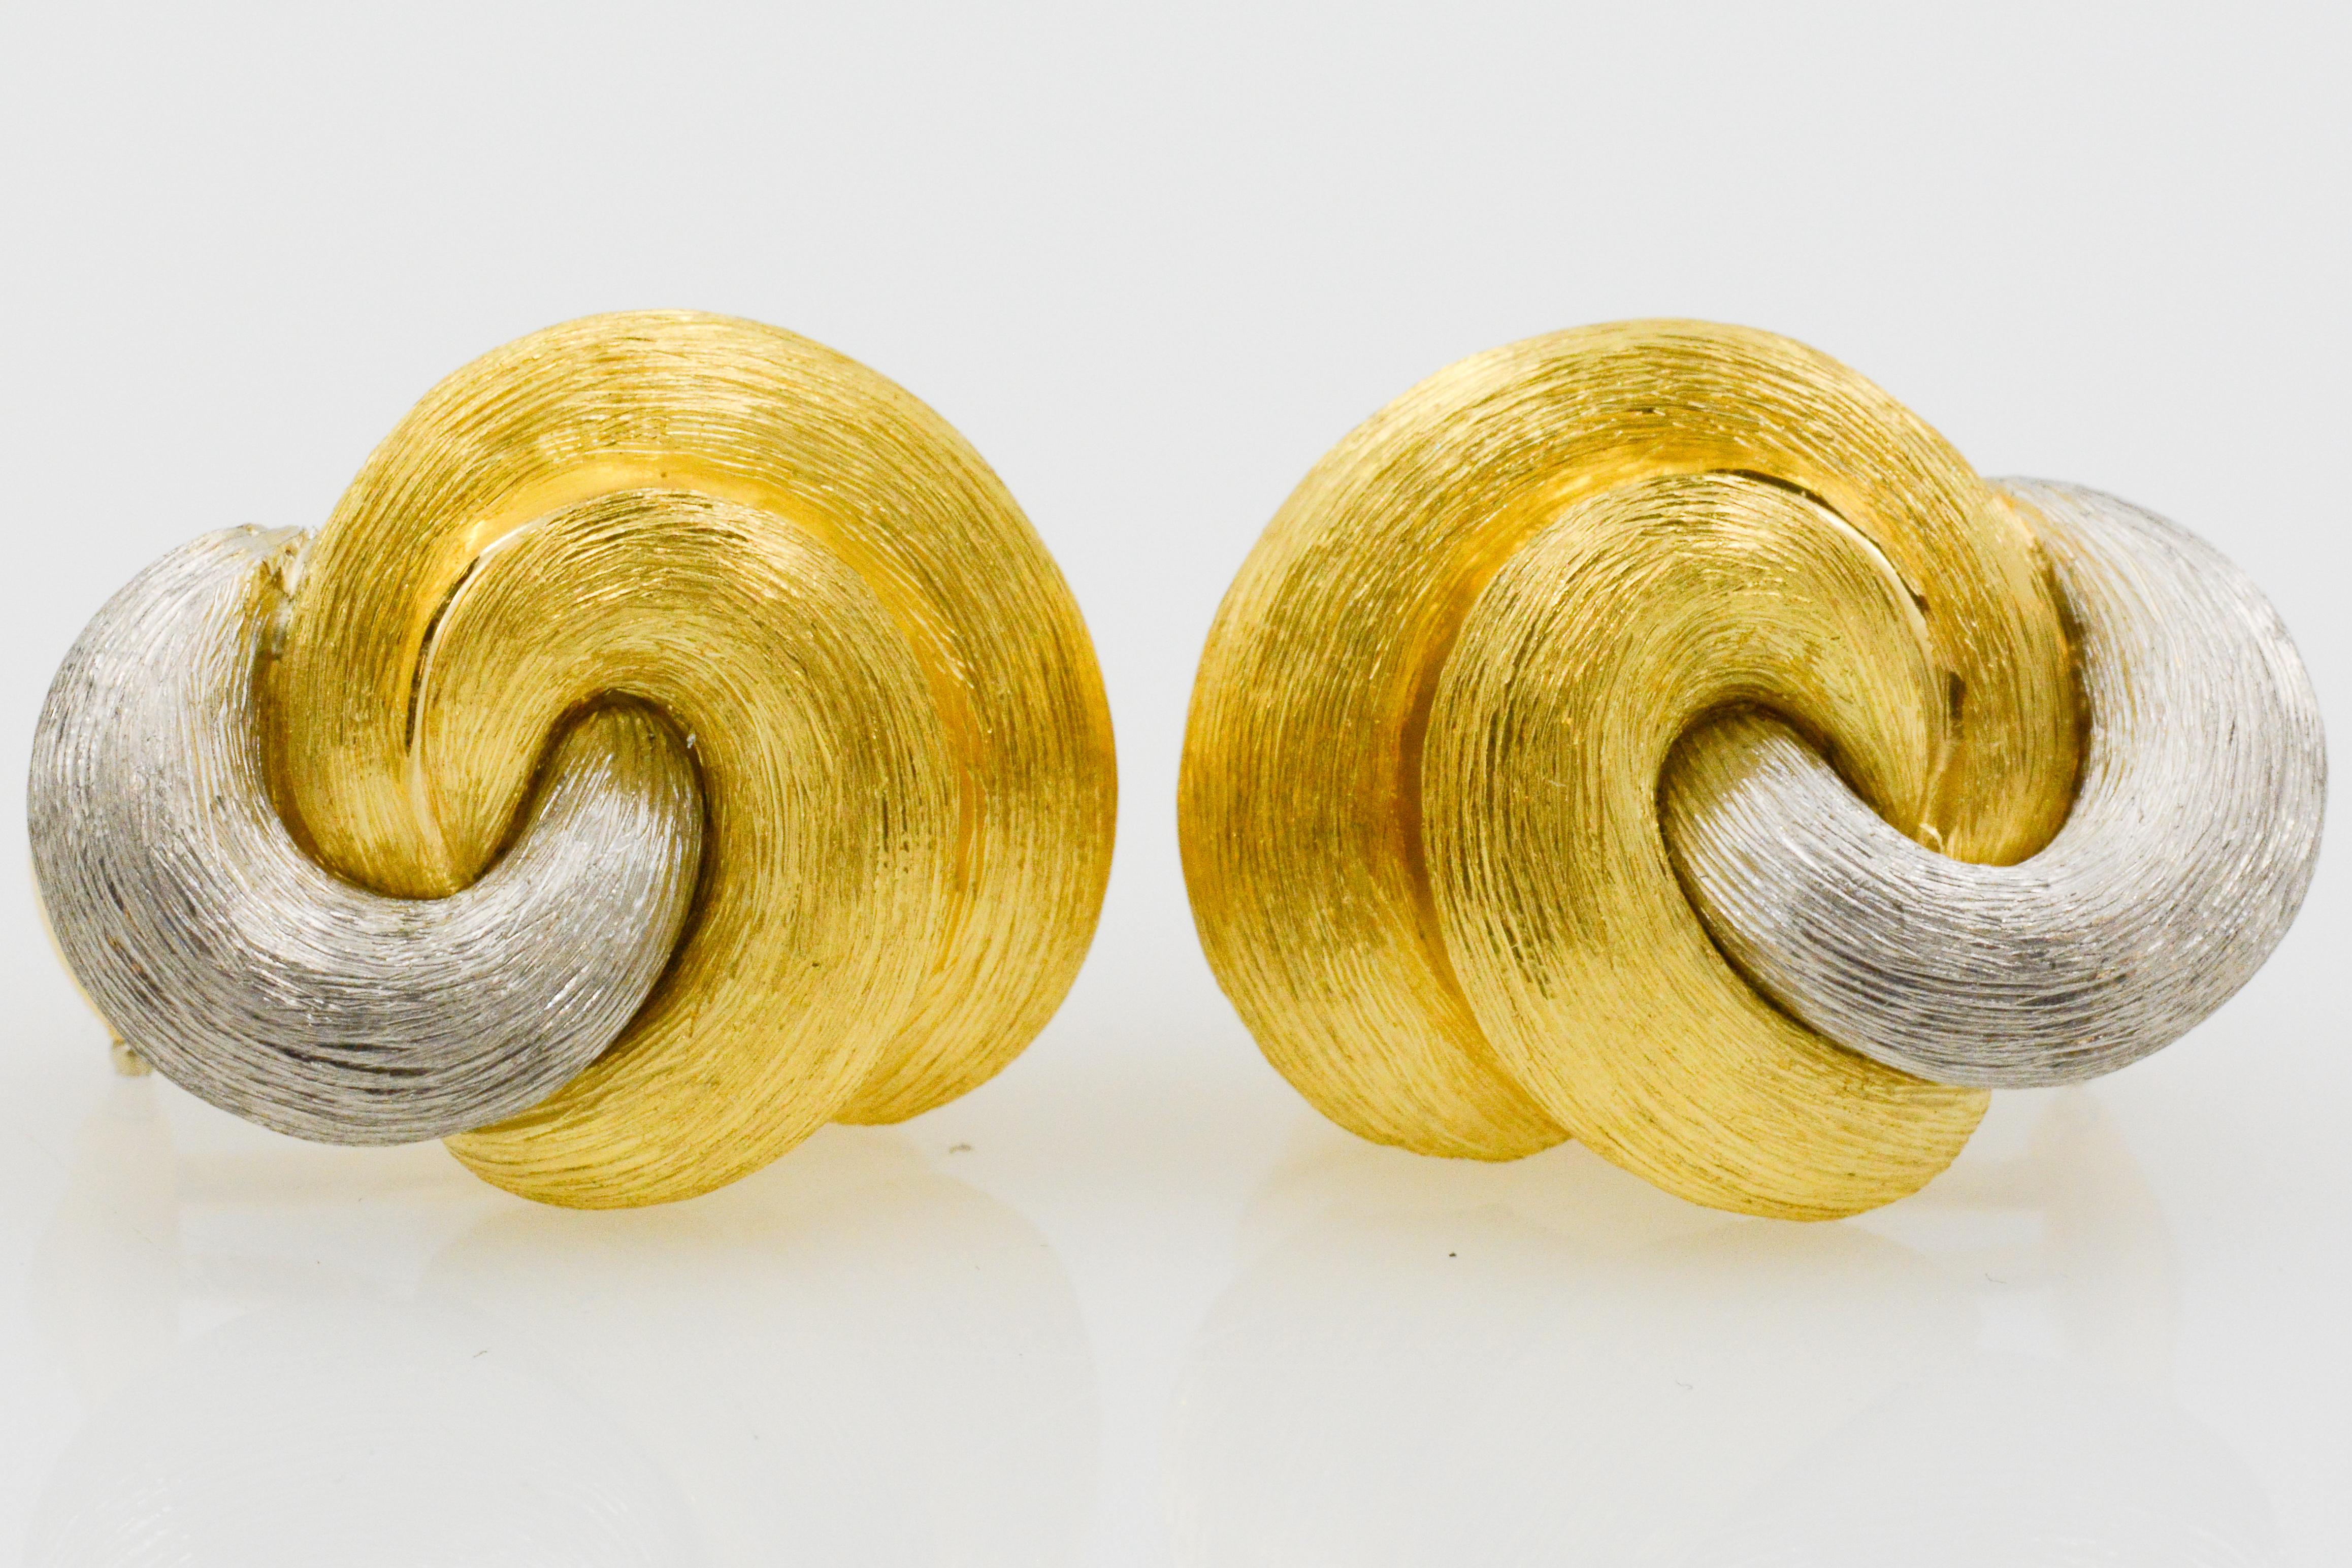 These charming Henry Dunay earrings have a knot design, mixing 18k yellow and white gold. The earrings have a satin finish with omega clip backs and are true to Dunay’s sabi inspiration. 